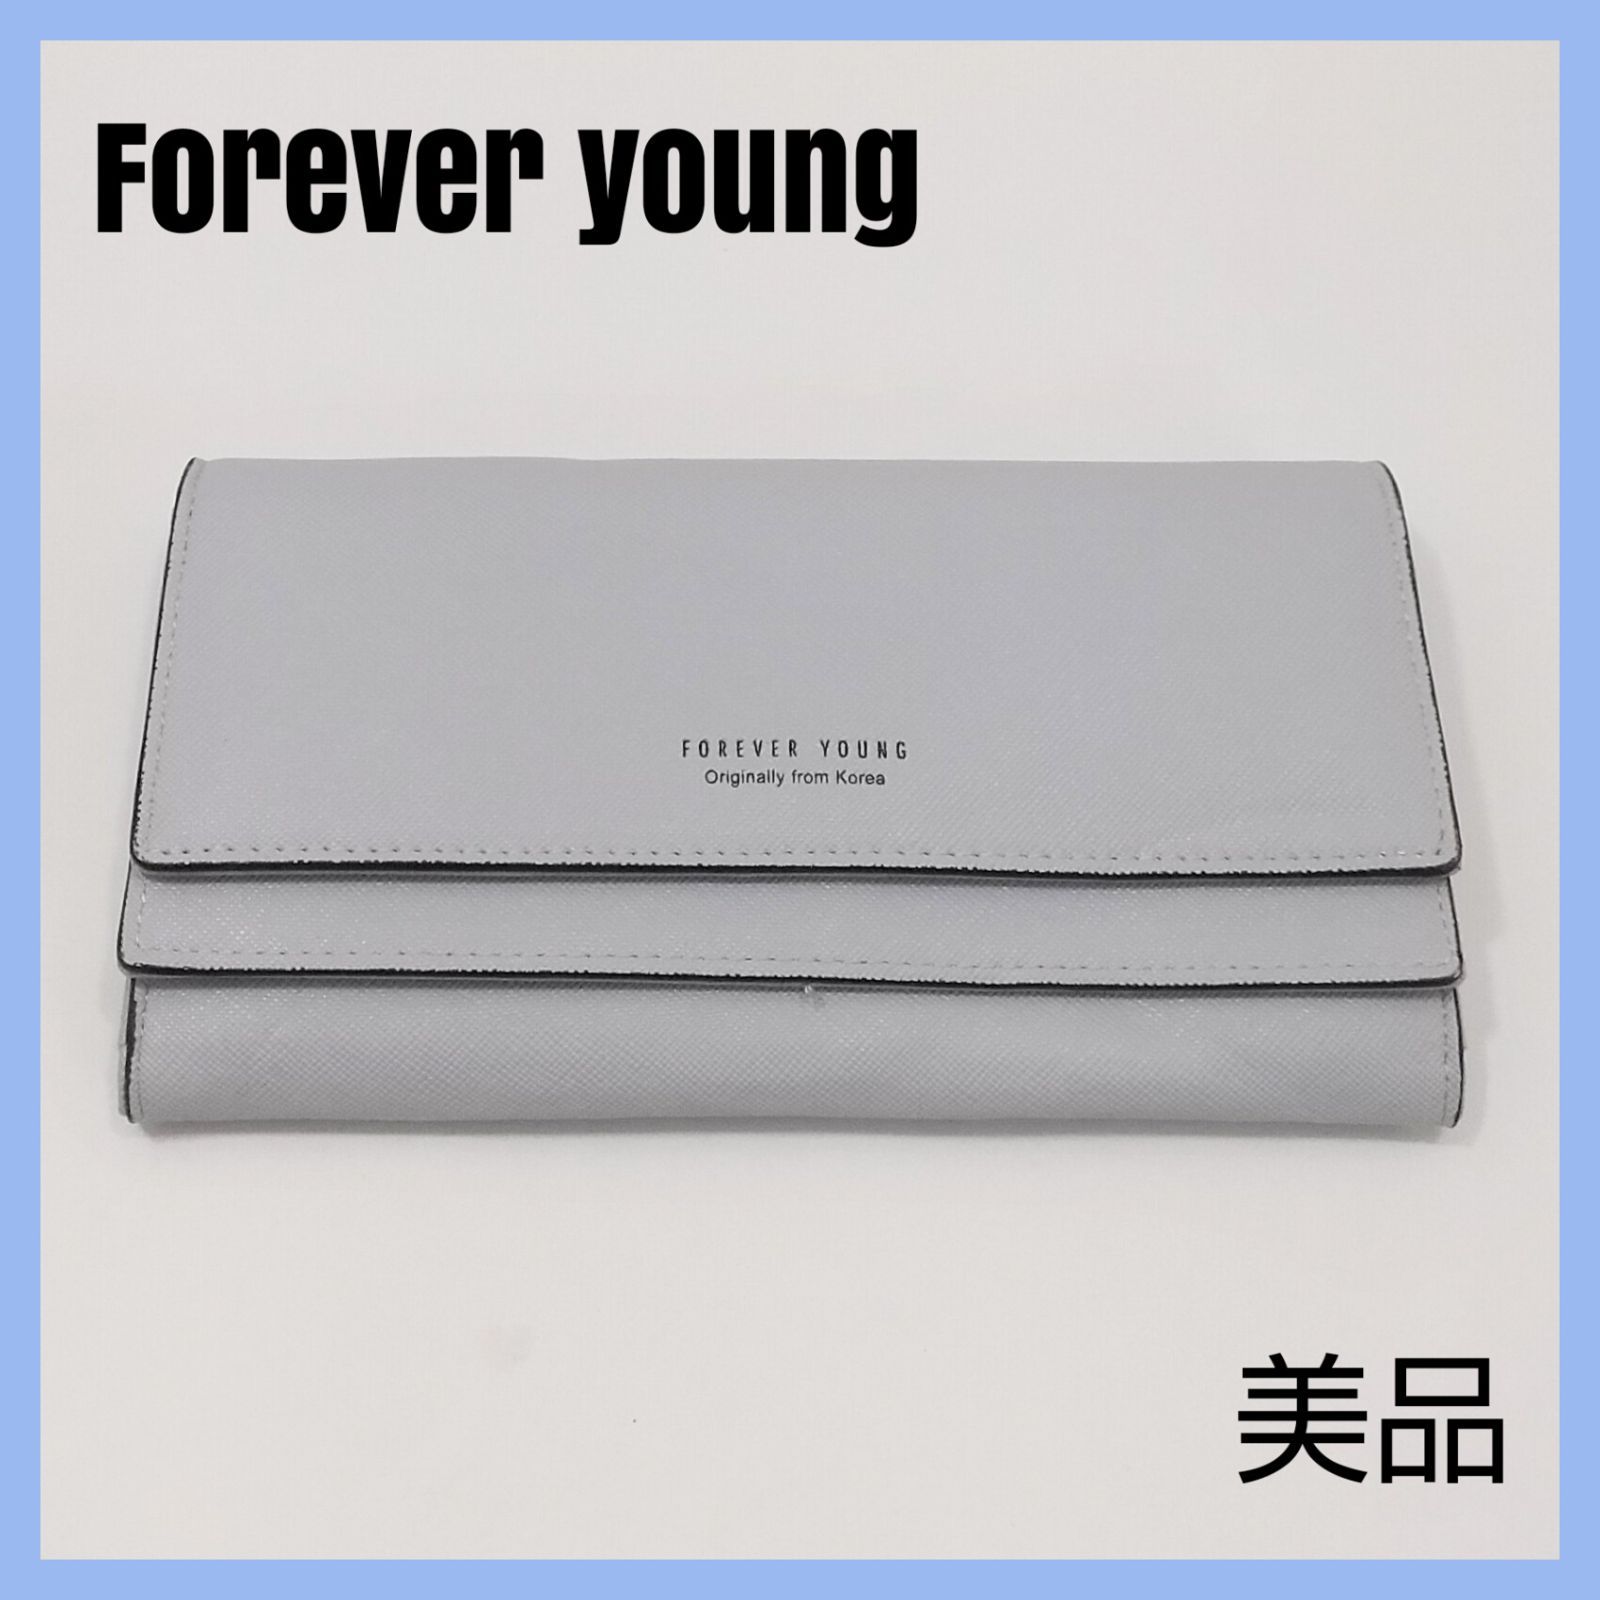 Forever young フォーエバーヤング  長財布